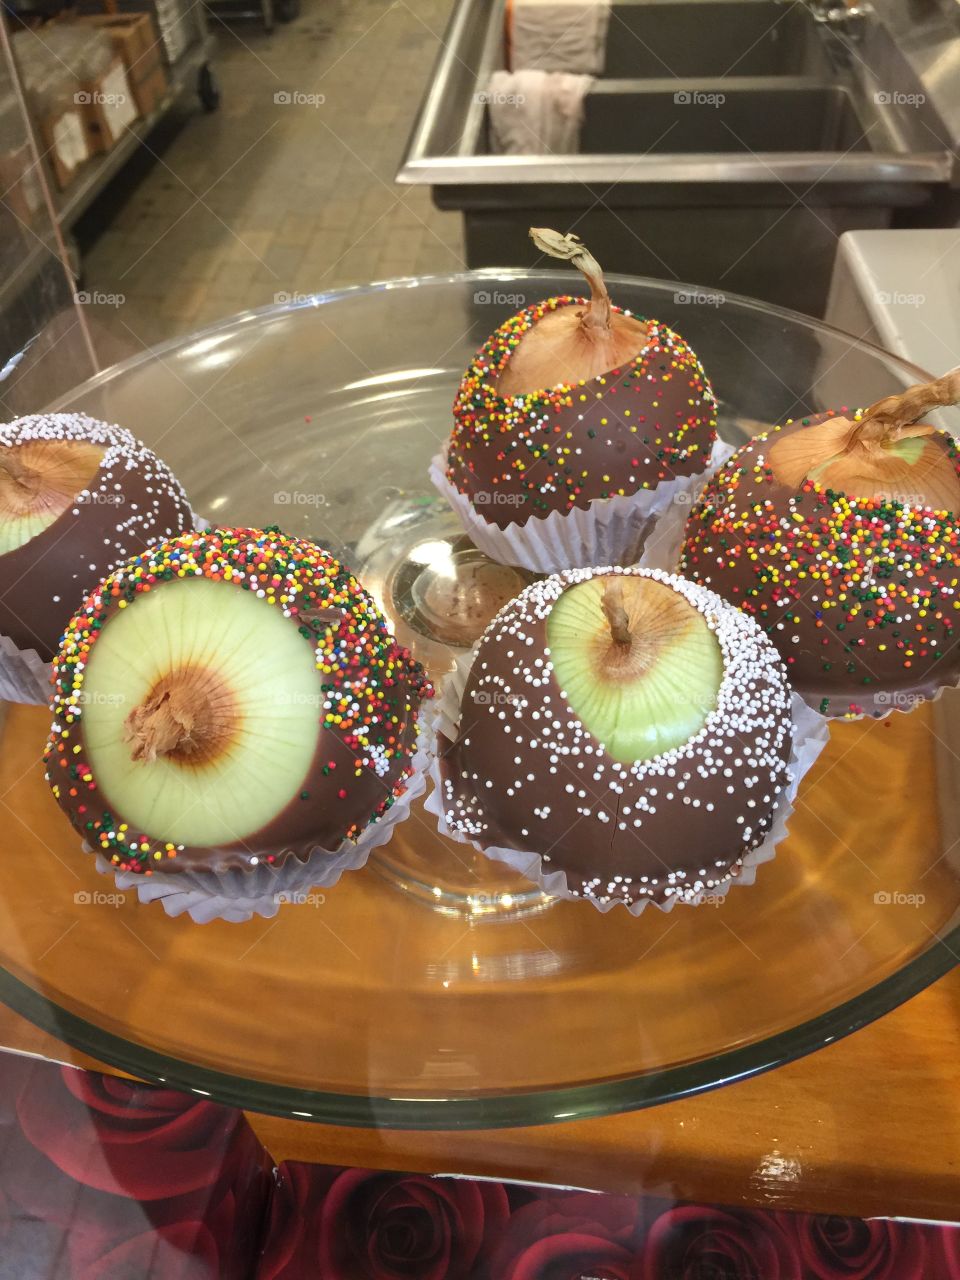 Chocolate covered Maui onions with sprinkles